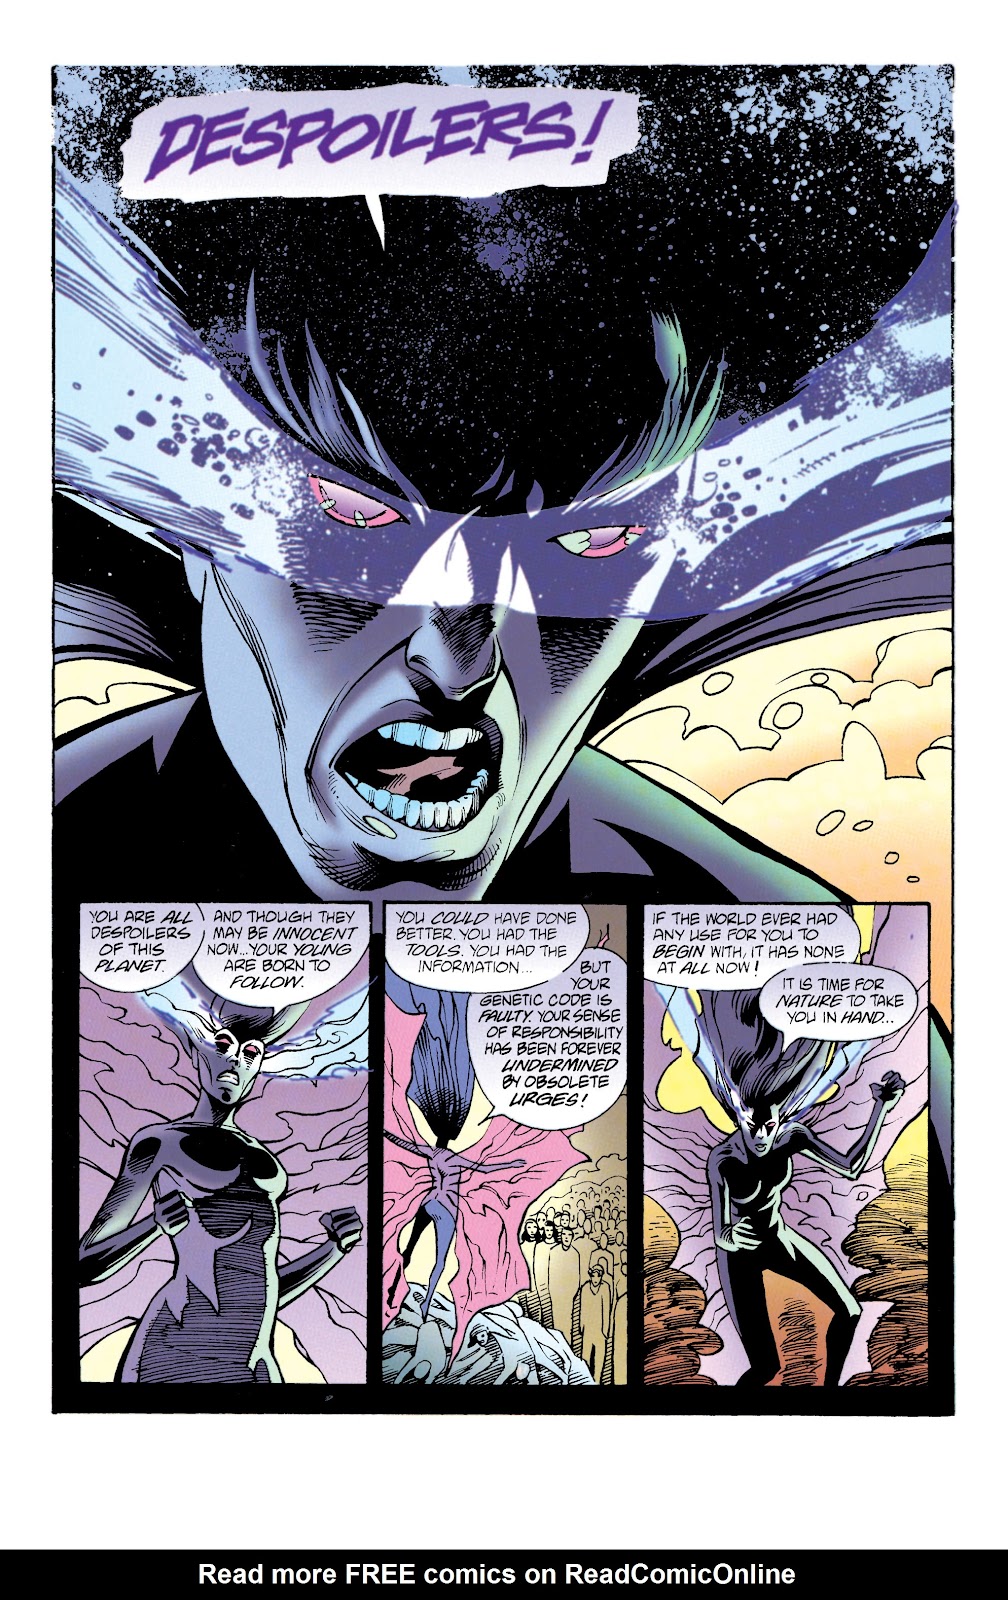 Black Orchid V2 21 | Read Black Orchid V2 21 comic online in high quality.  Read Full Comic online for free - Read comics online in high quality .|  READ COMIC ONLINE